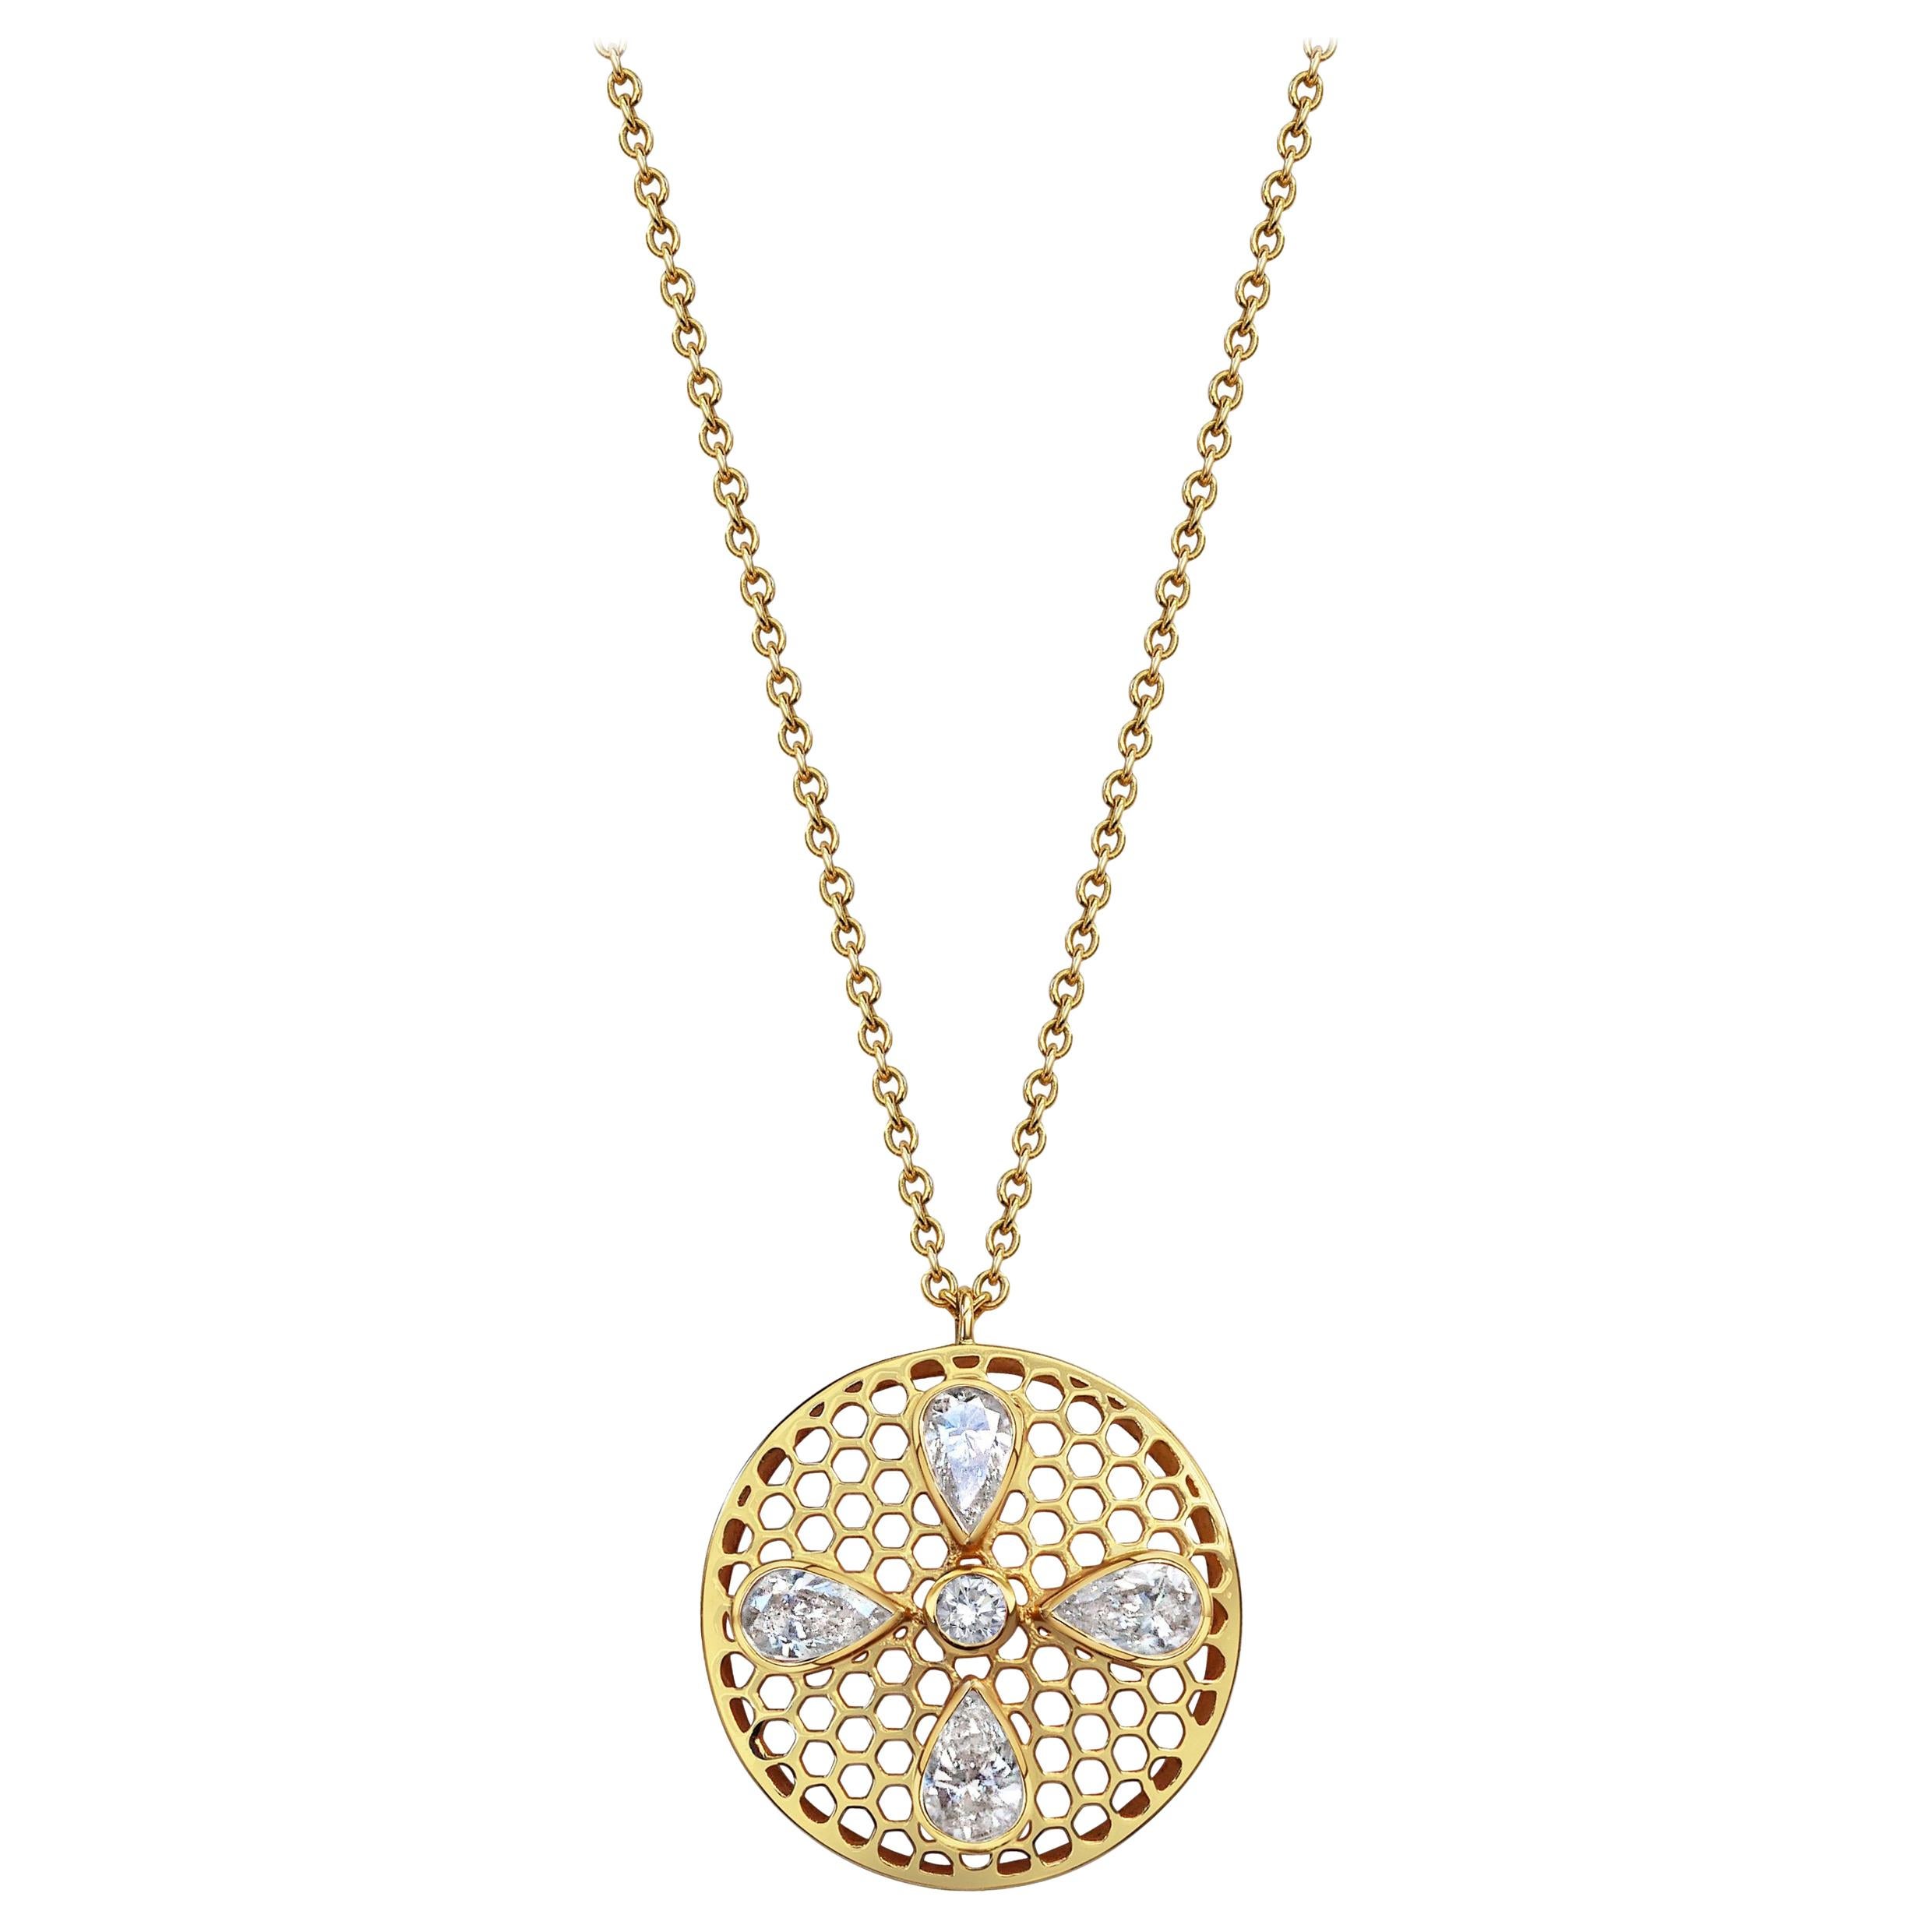 Handcrafted Diamonds and 18 Karat Yellow Gold Pendant Necklace